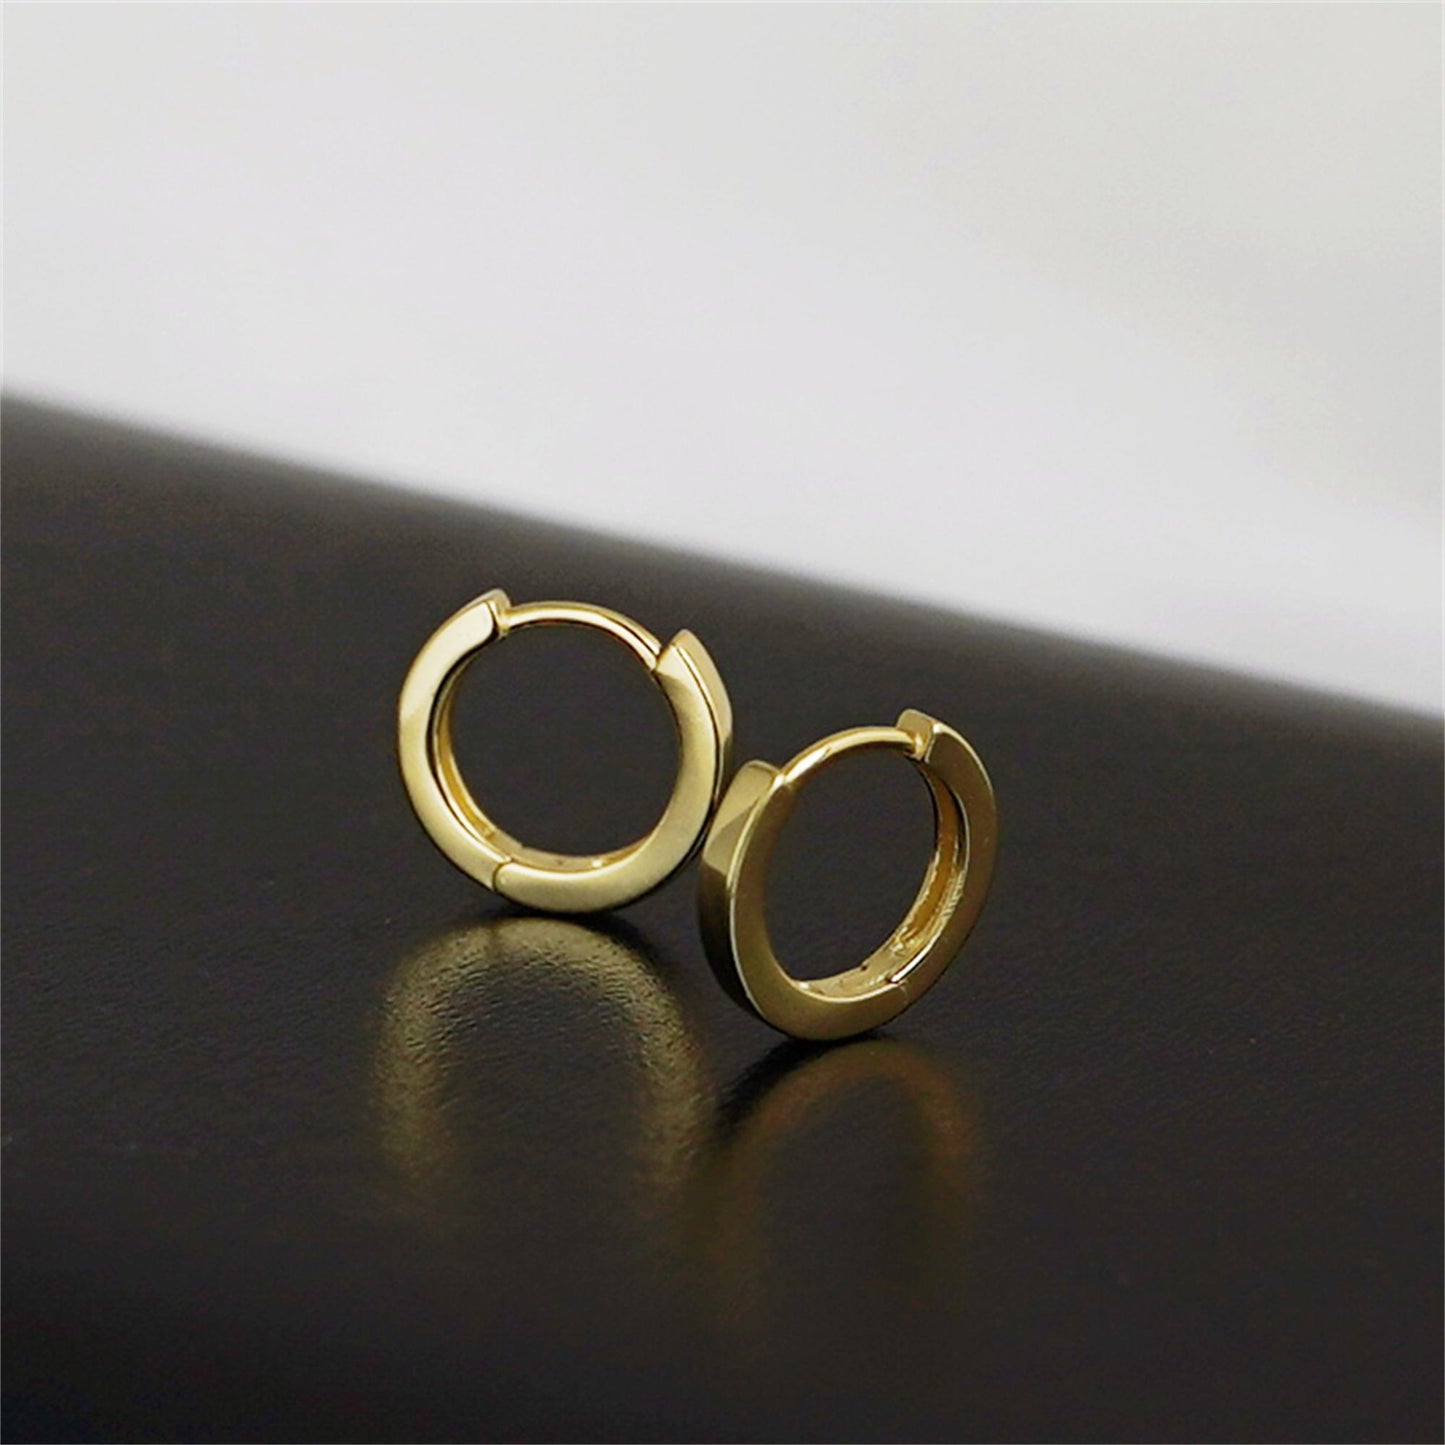 10mm Cuff Hoop Earrings with 2mm Band in 18K Gold Plated Sterling Silver